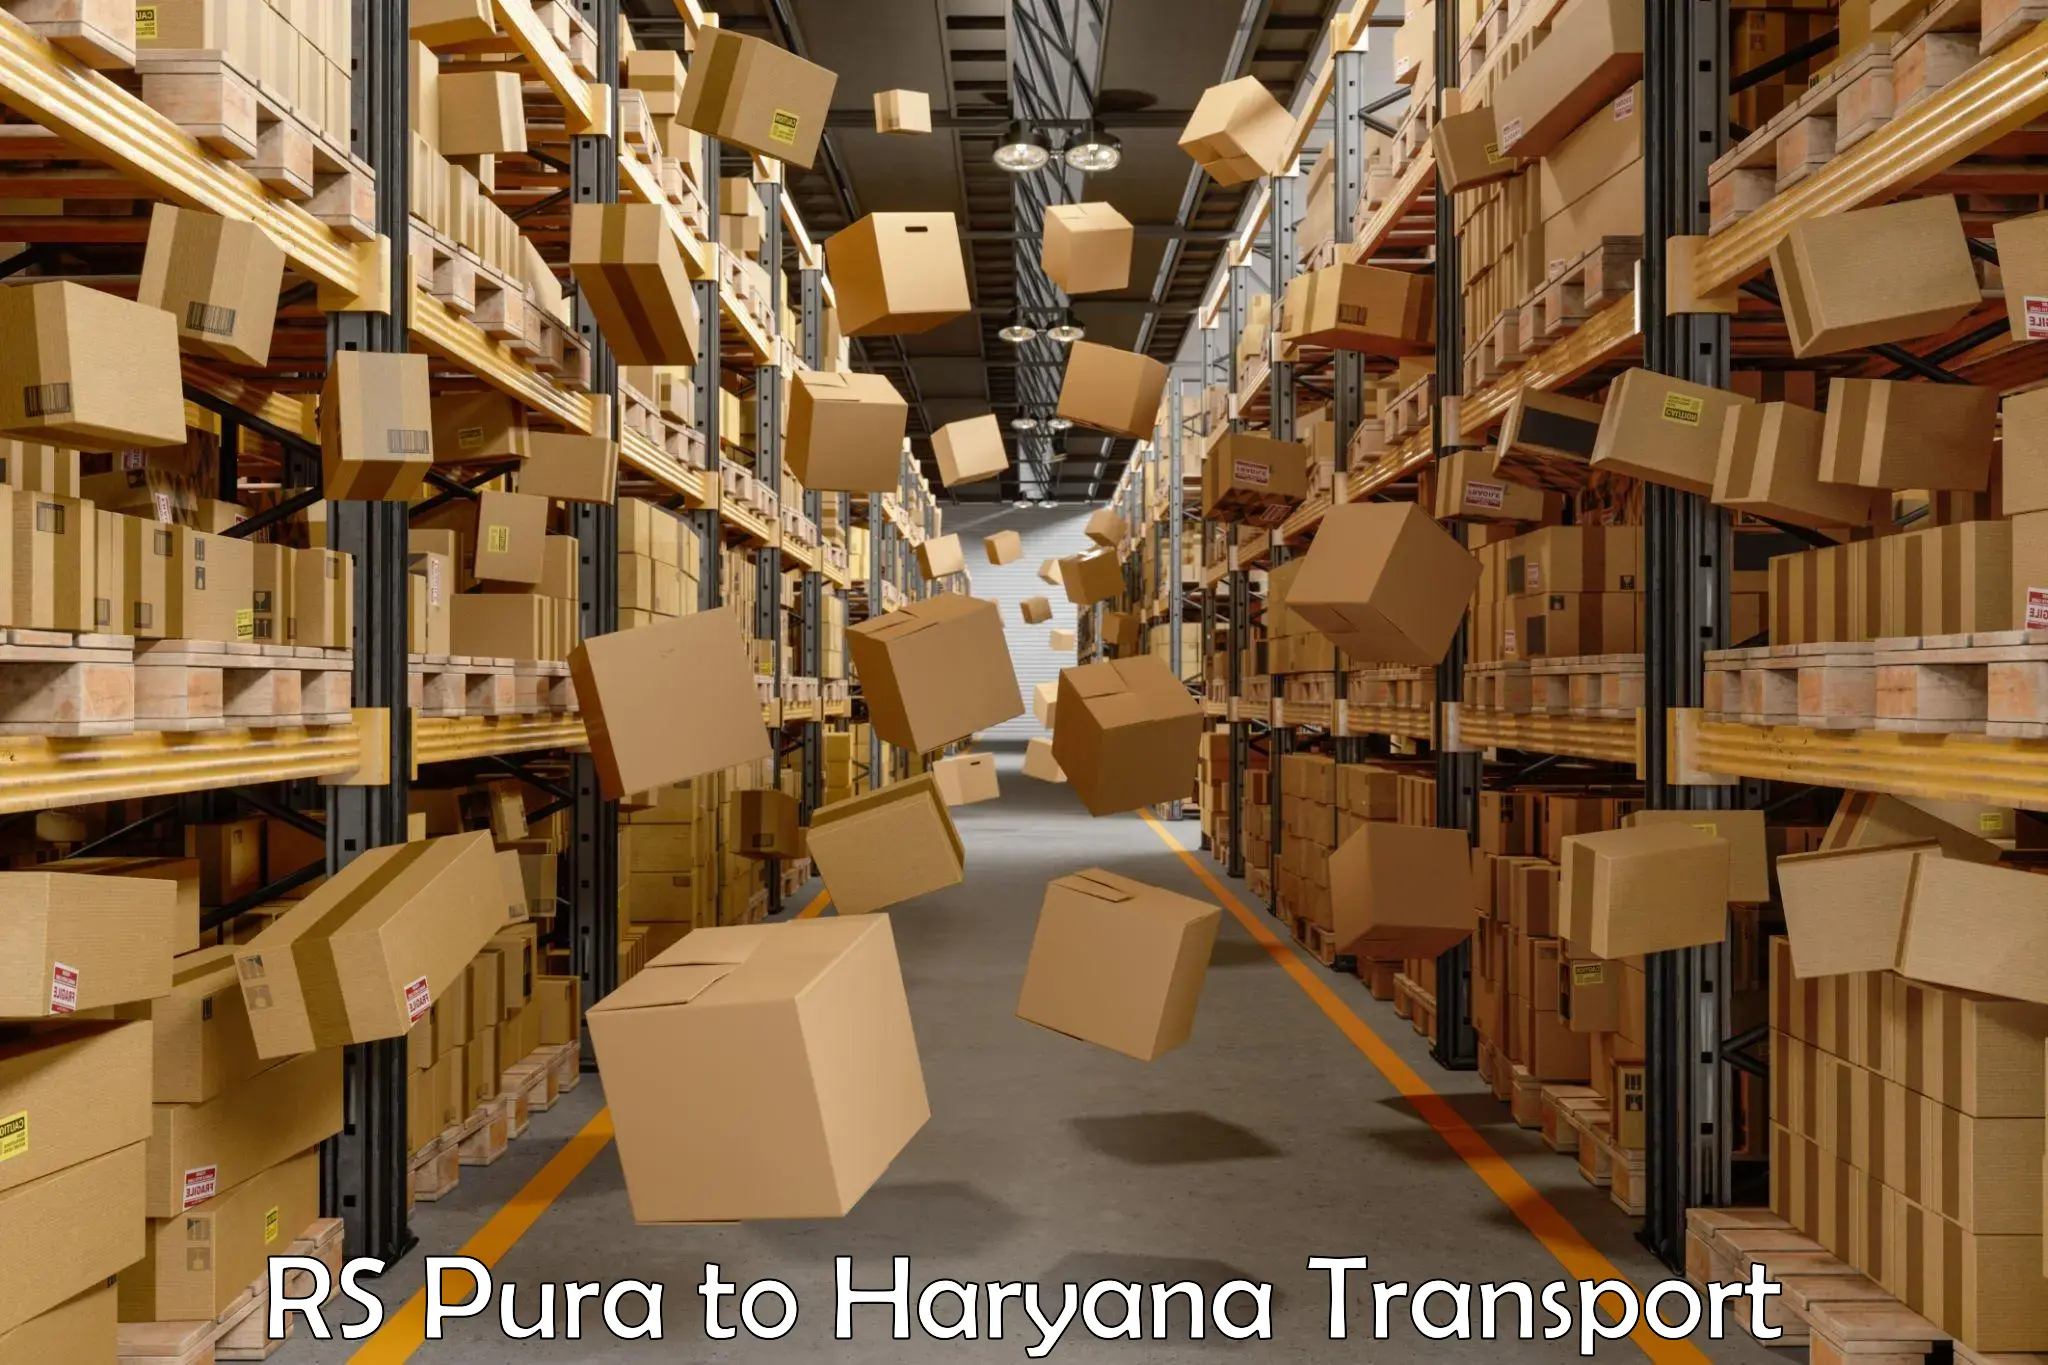 Land transport services RS Pura to Haryana